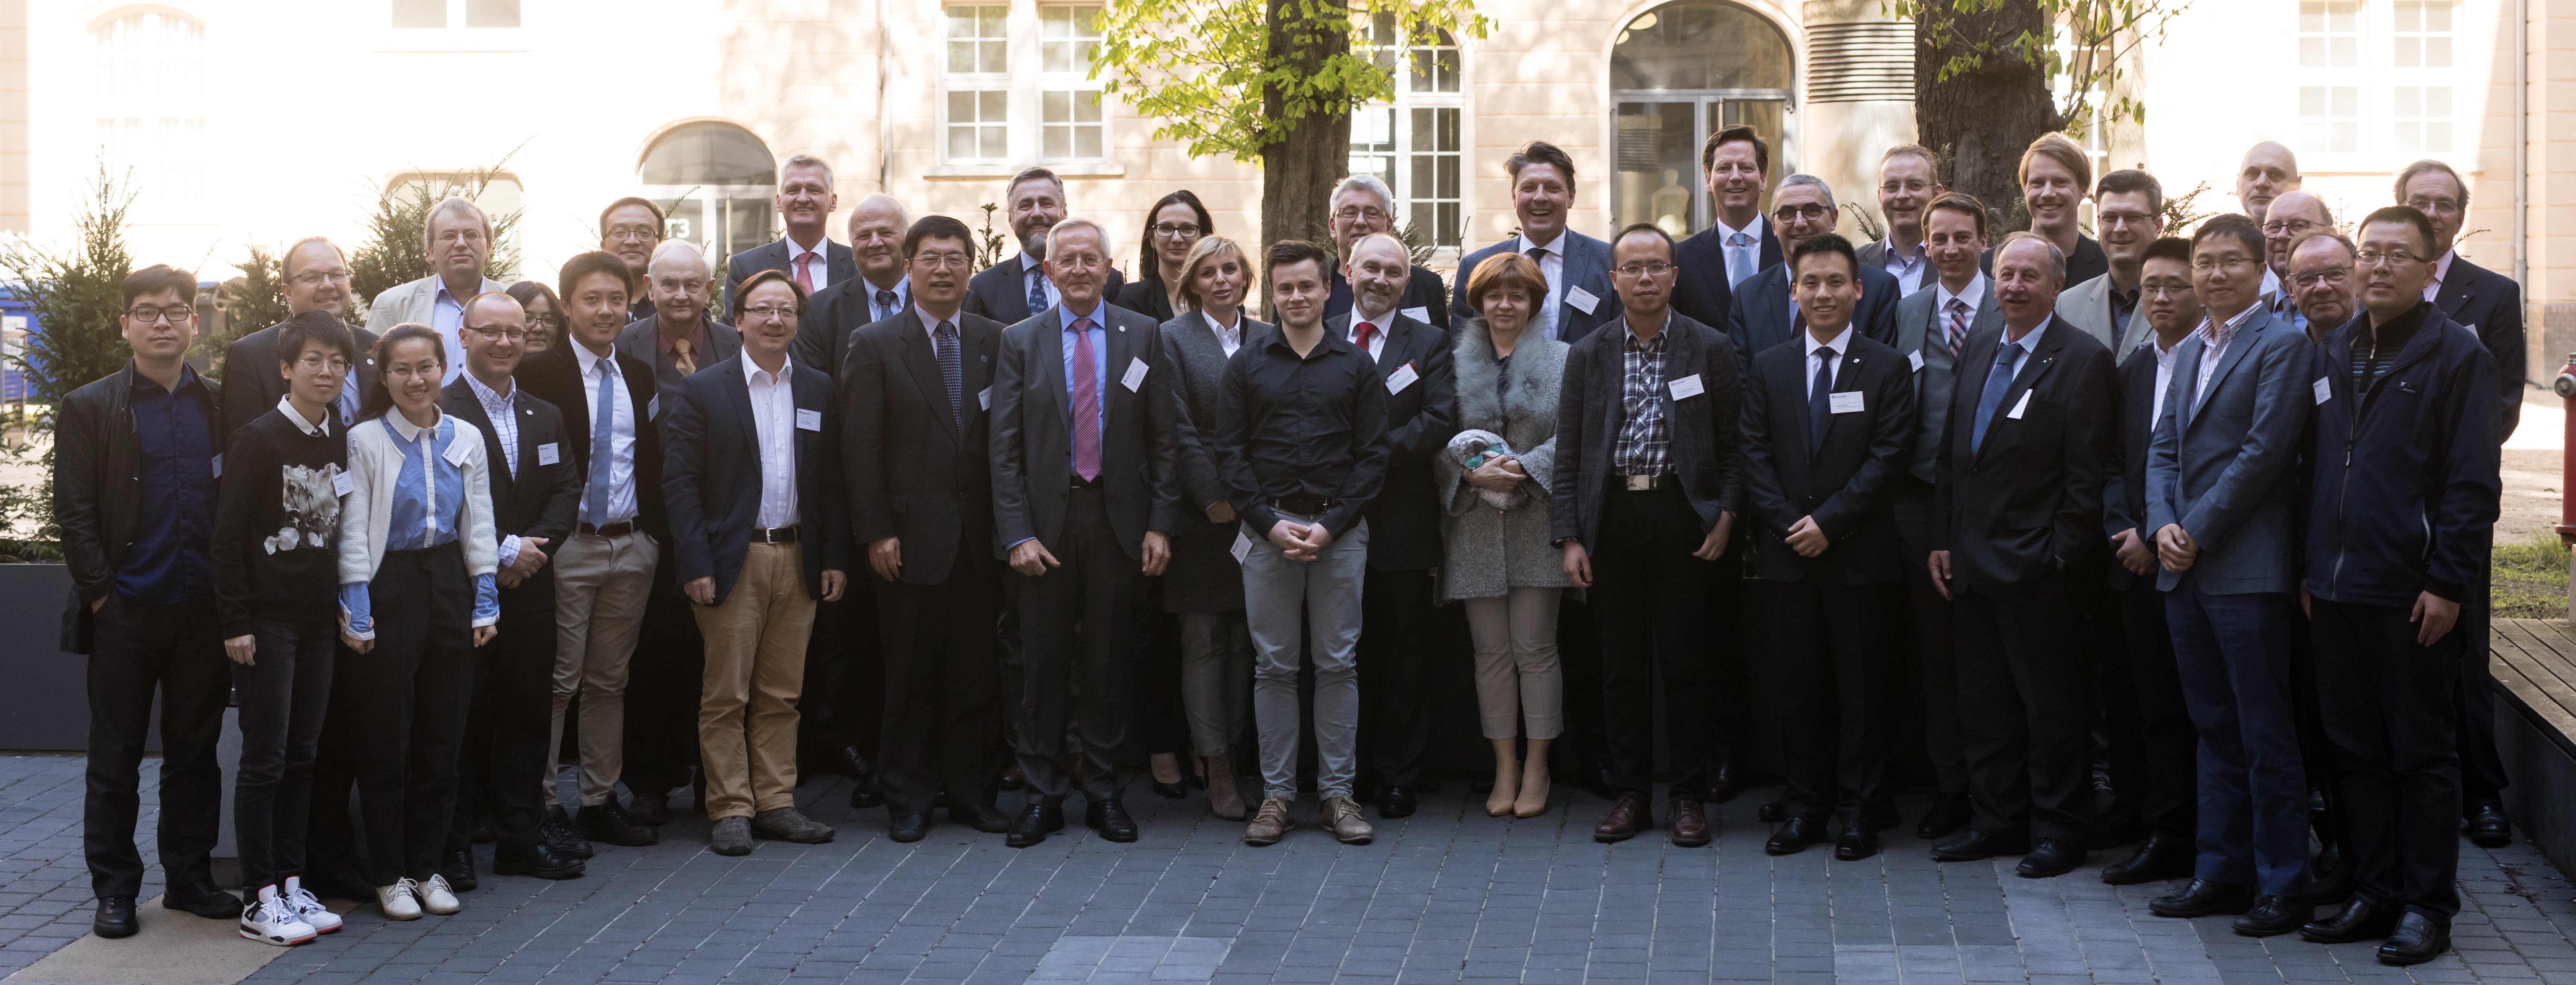 More than 40 experts from Poland, the Czech Republic, China and Germany exchanged views in the workshop.